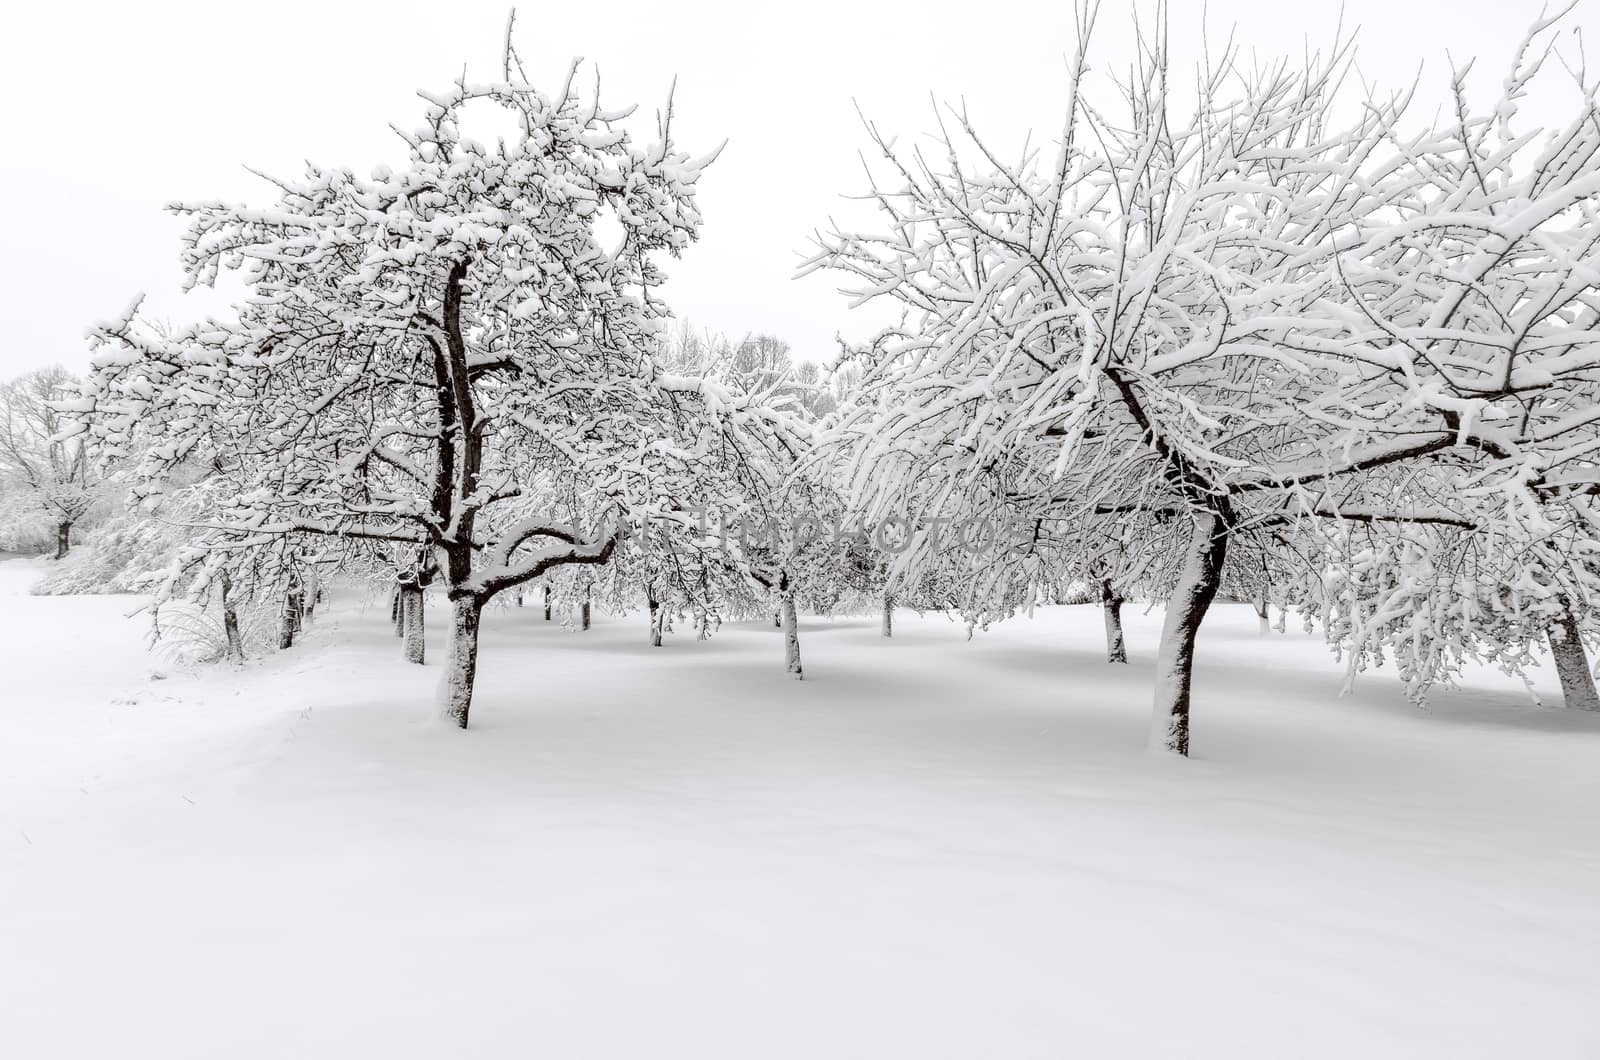 Winter, apple trees with snow after snowfall